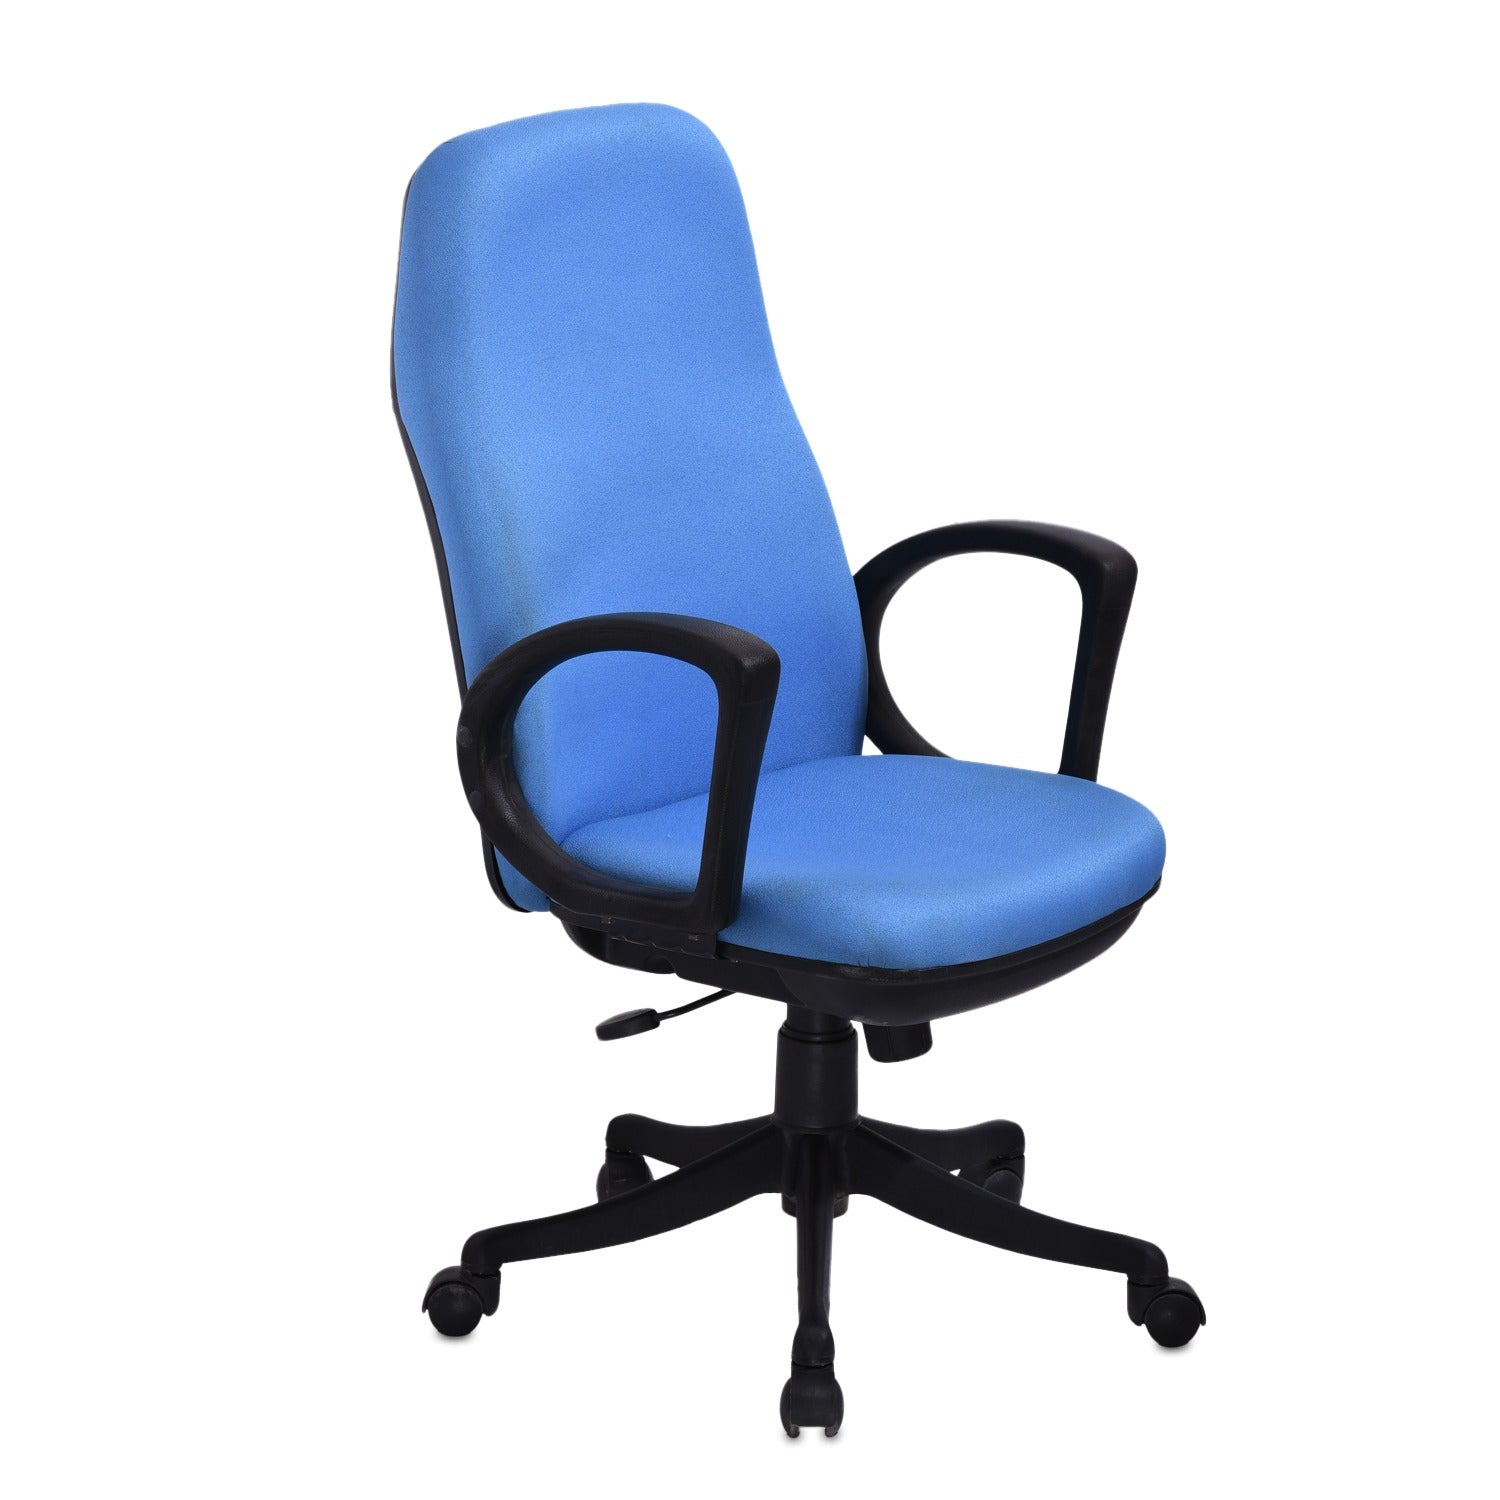 ZSE1026 High Back Chair by Zorin in Blue Color Zorin